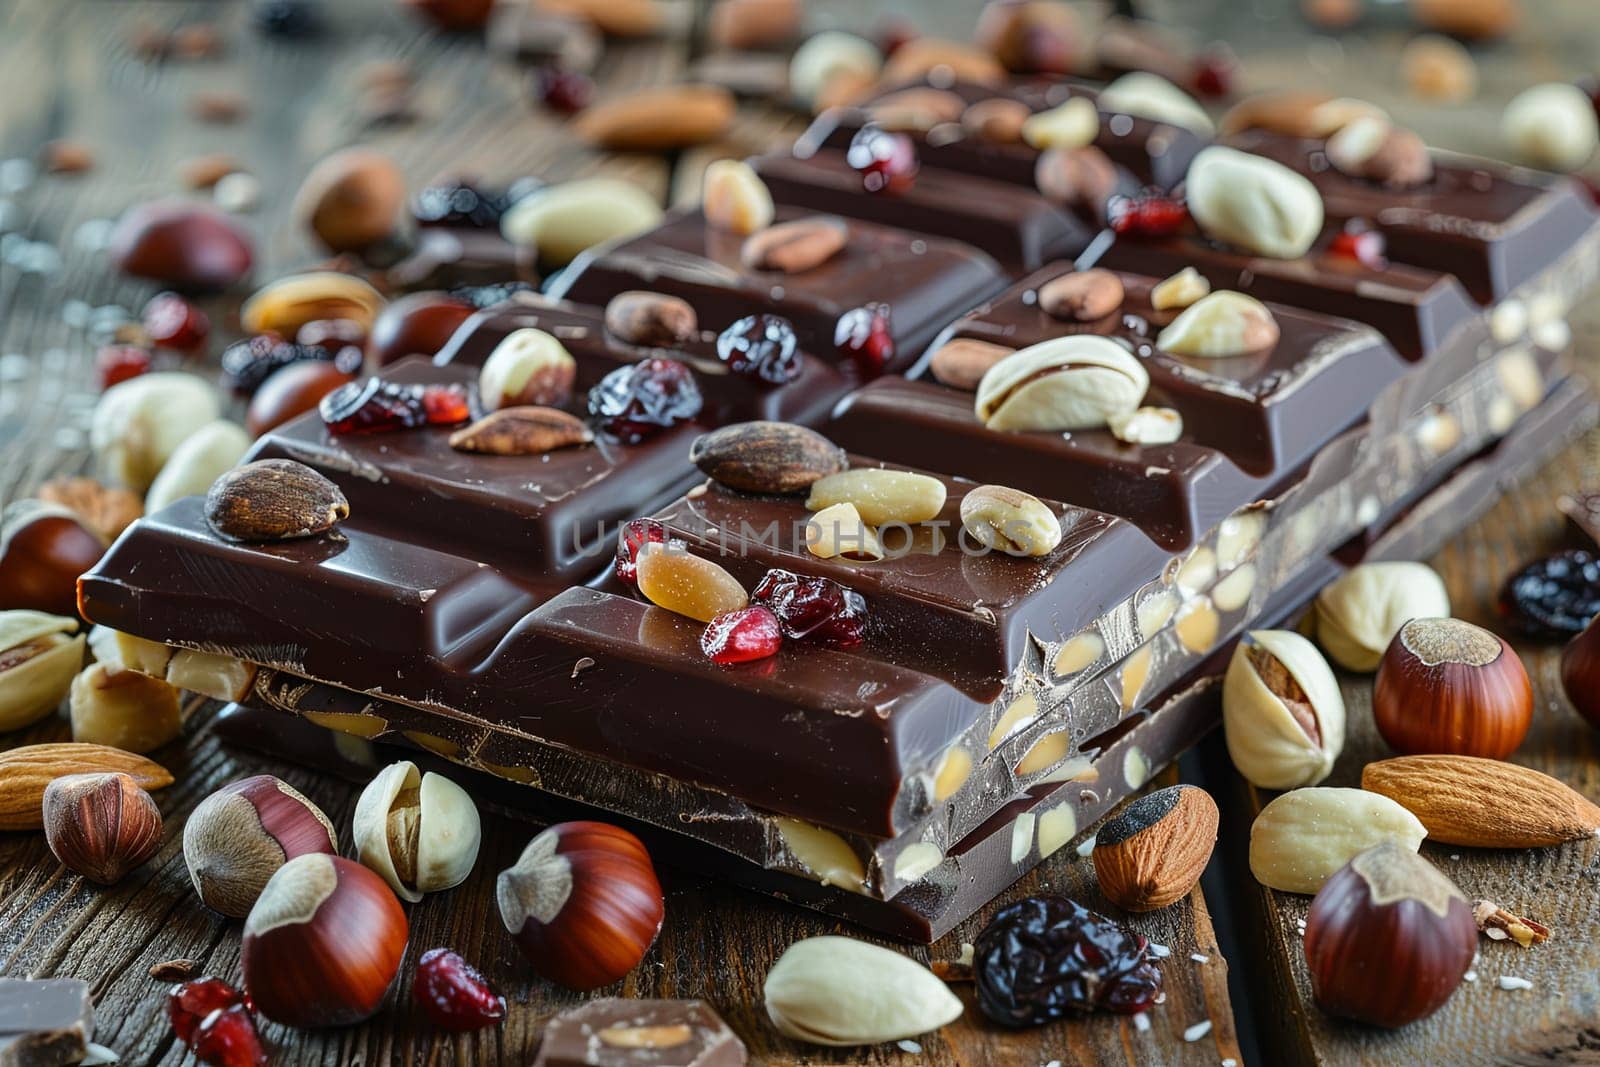 Detailed close up of a chocolate bar filled with nuts and dried fruits, showcasing rich textures and natural ingredients.